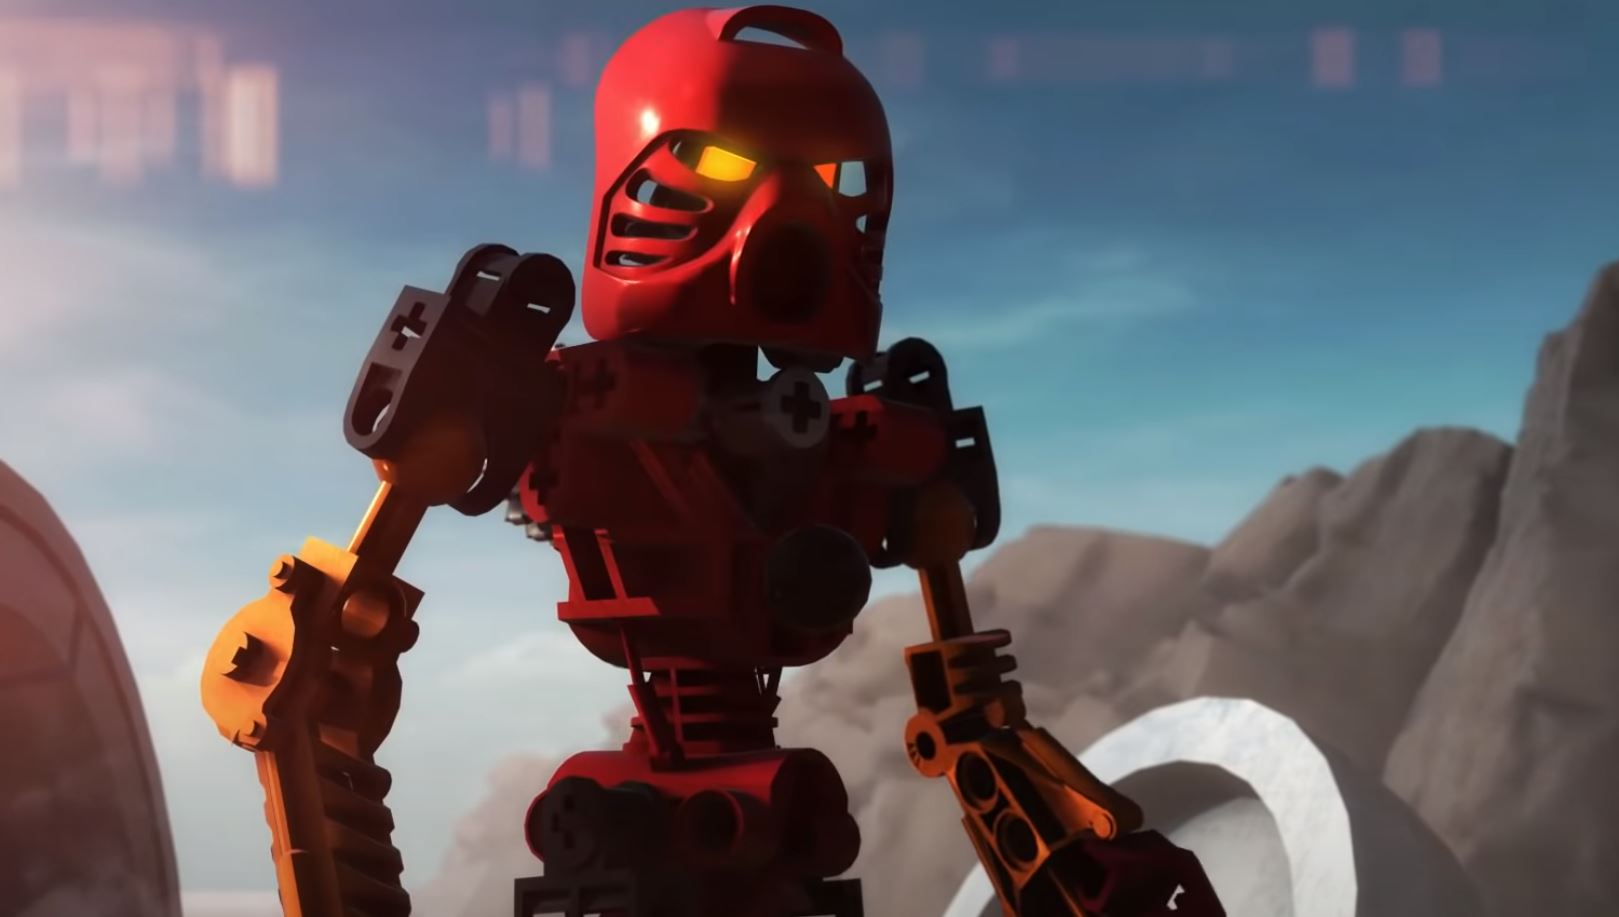 This open world Lego Bionicle fan game looks ridiculously ambitious